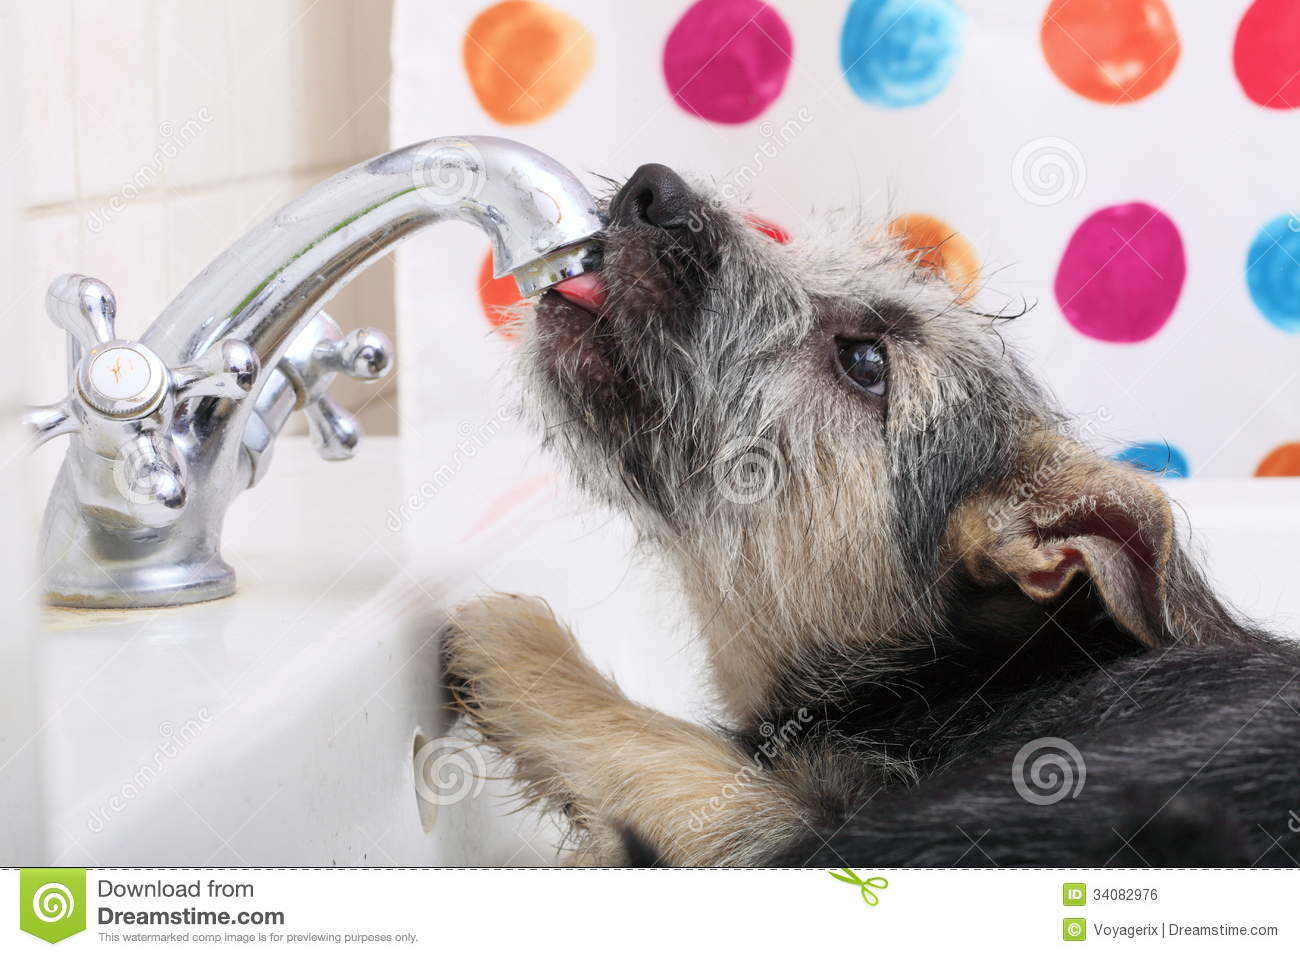 Animals At Home Dog Pet Drinking Water In Bathroom Royalty Free Stock